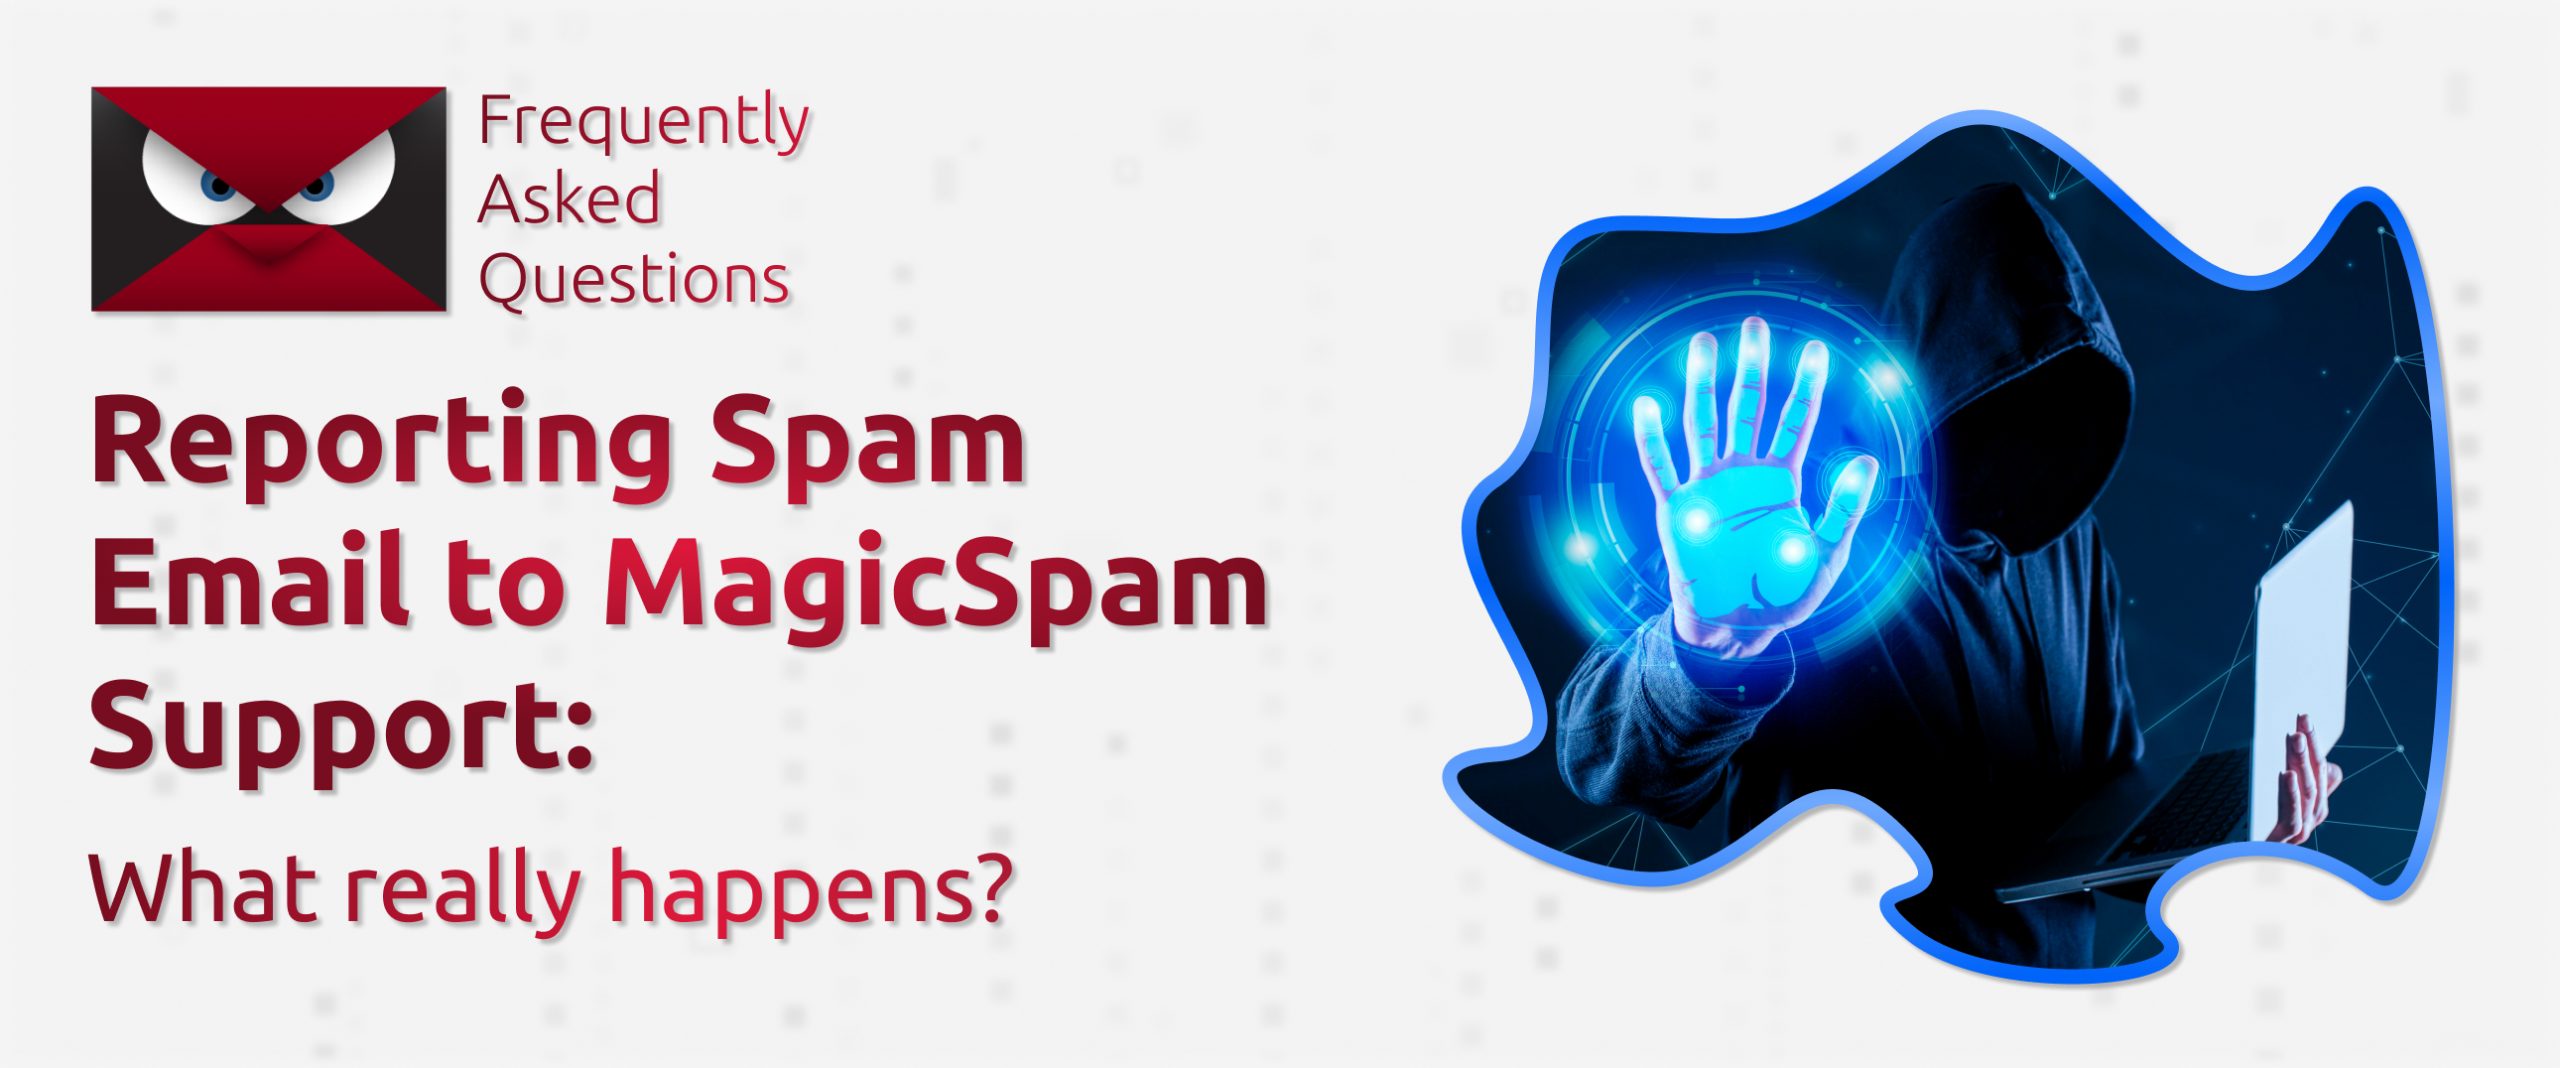 Reporting spam to magicspam support